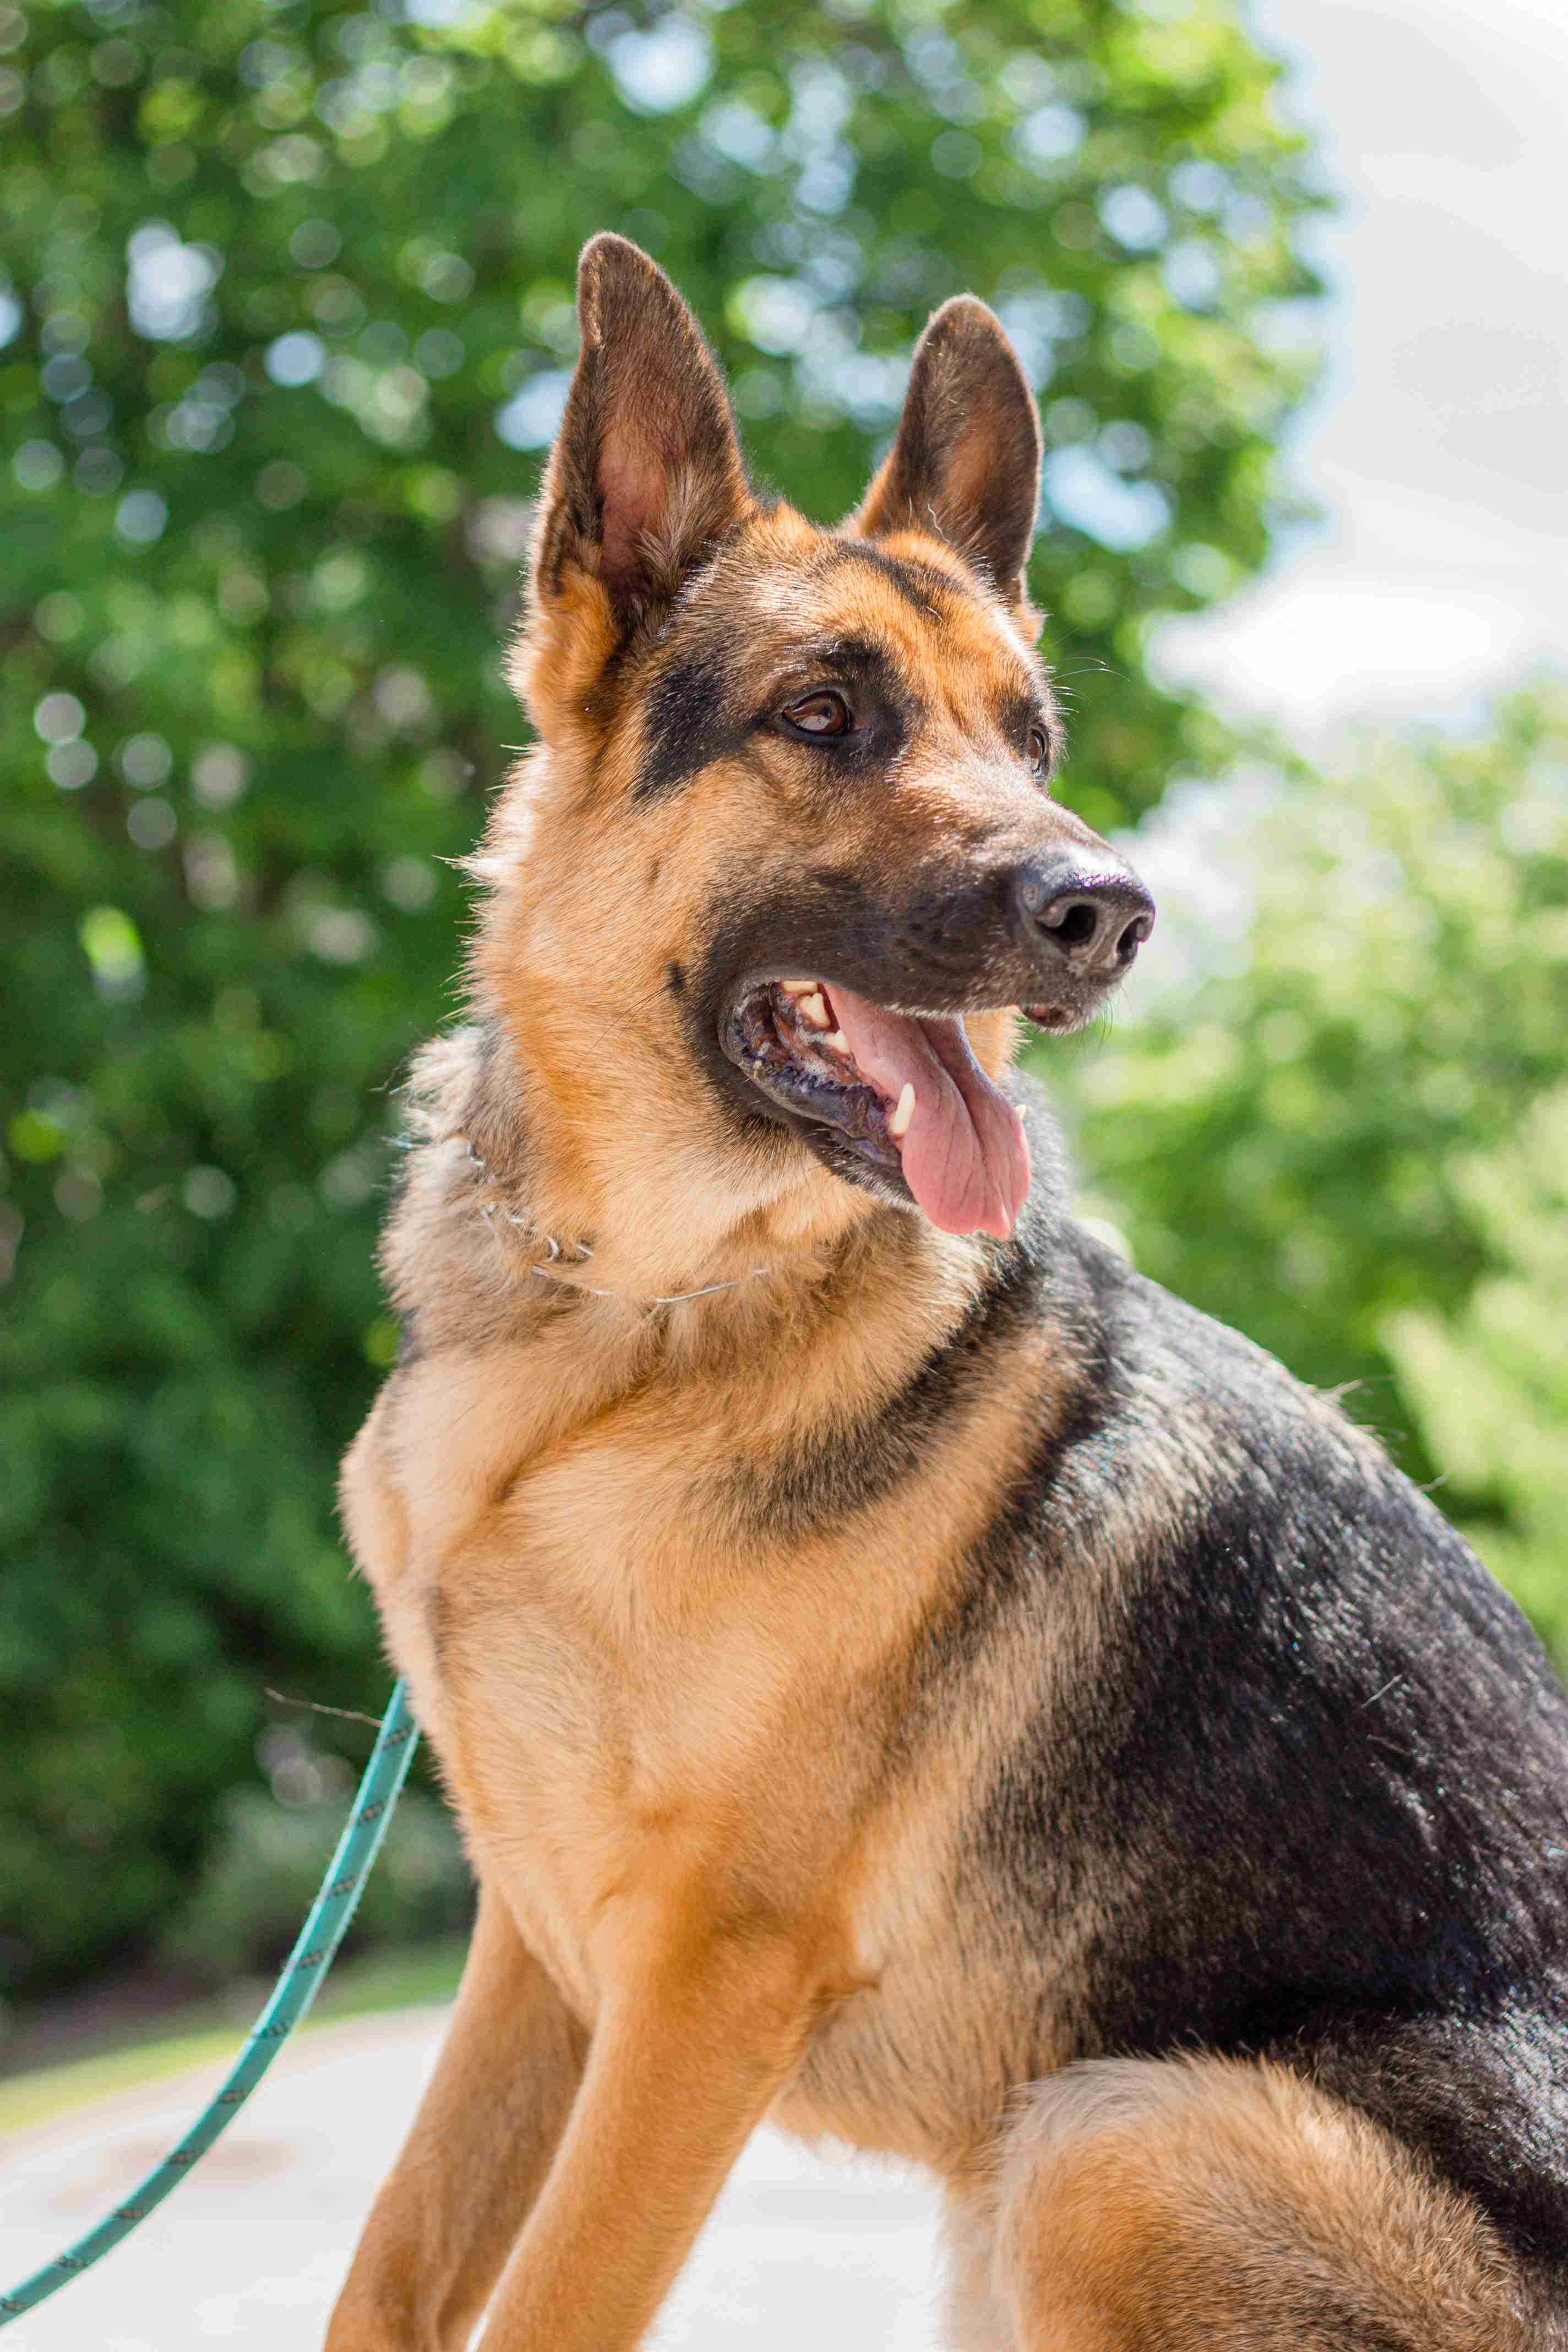 What kind of leash and collar is best for a German Shepherd living in an apartment?